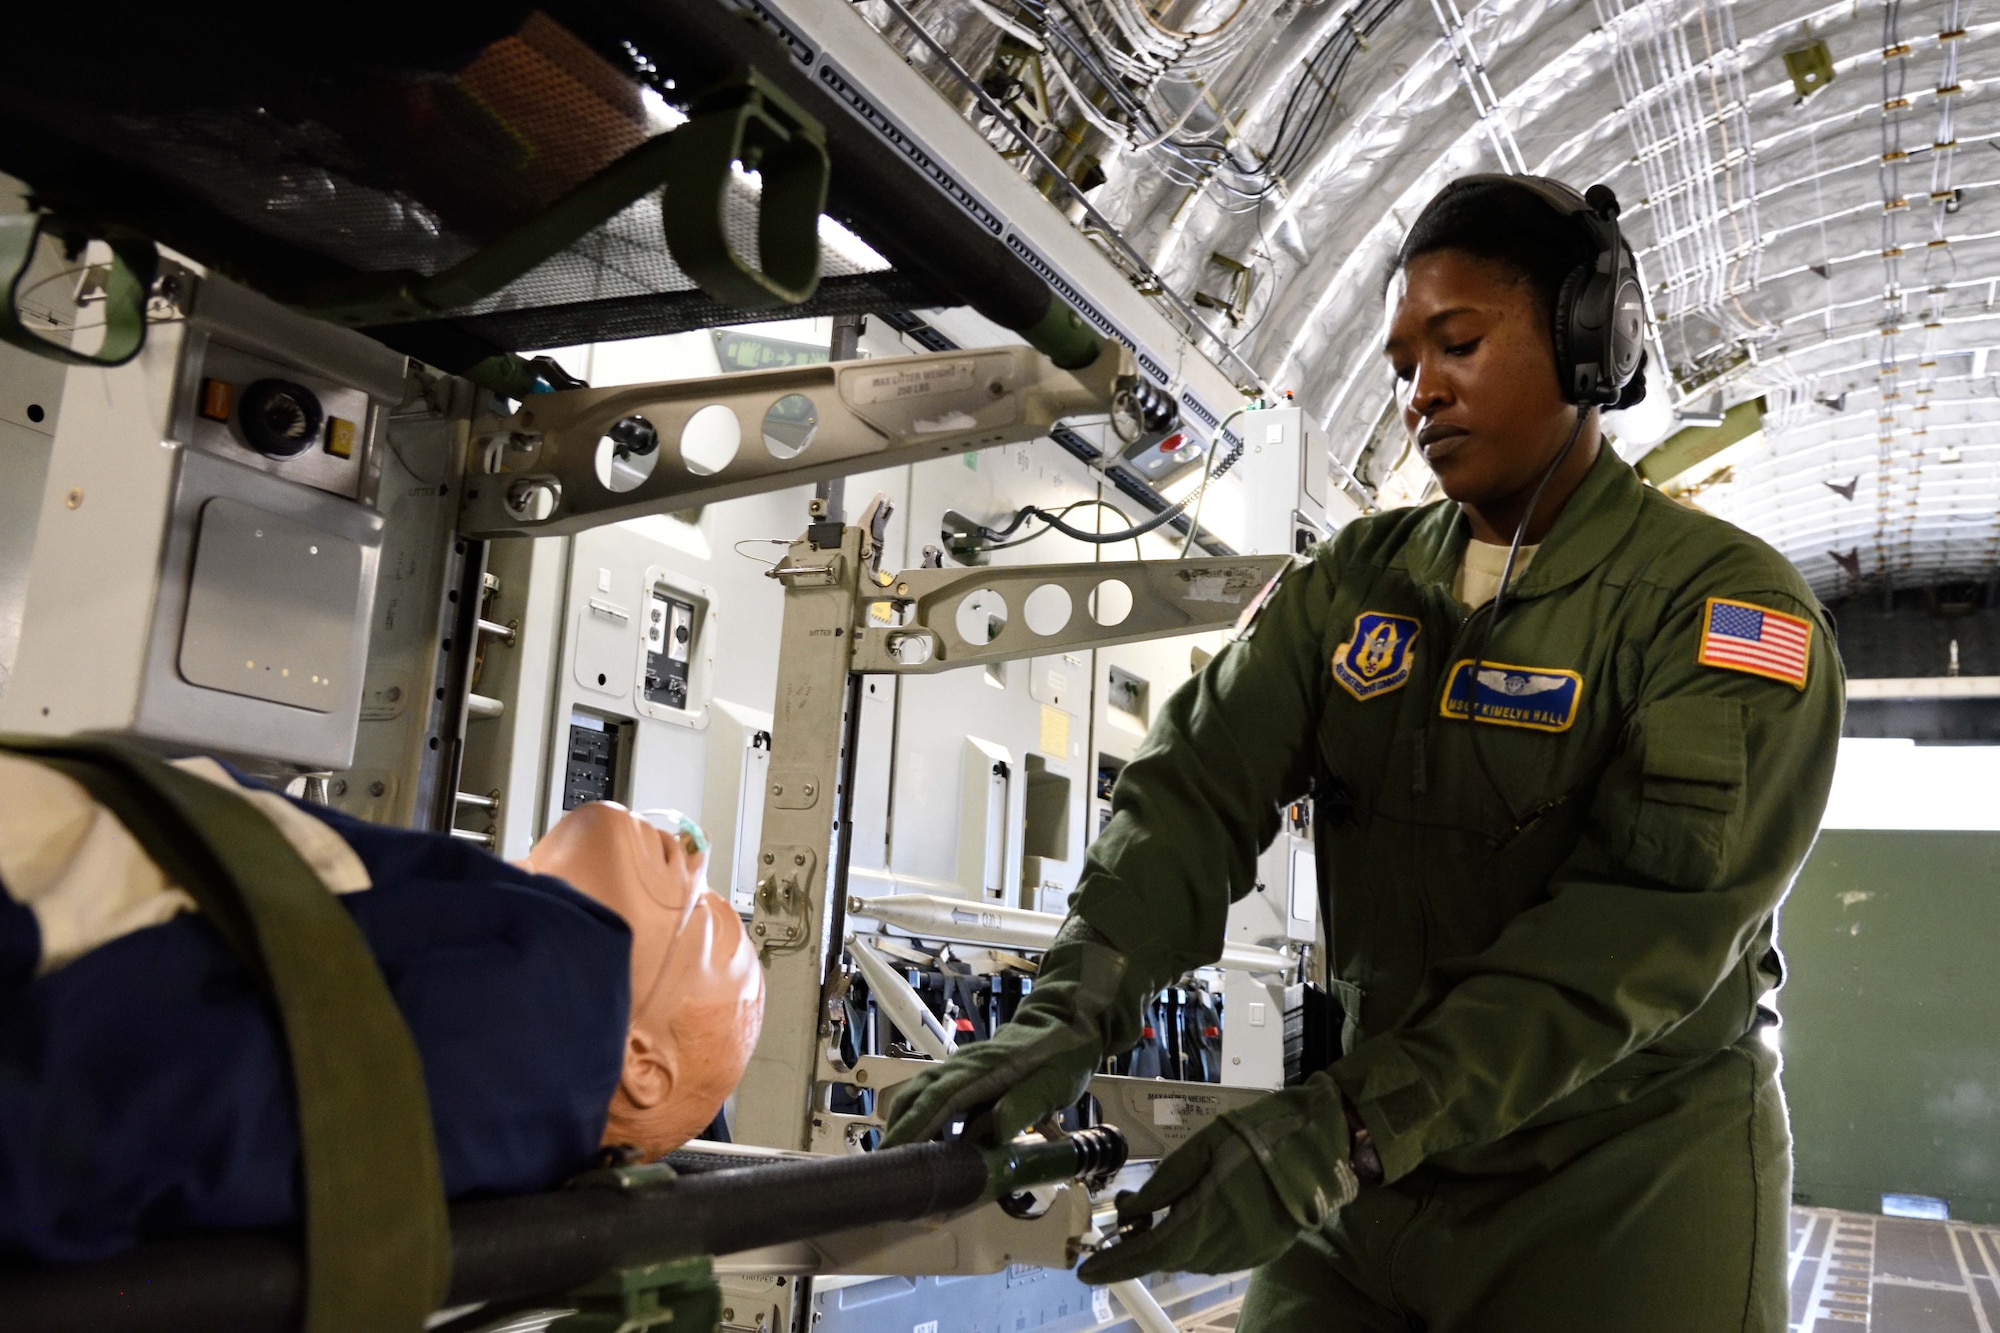 Master Sgt. Kimelyn Hall, 36th Aeromedical Evacuation Squadron aeromedical evacuation technician, secures a litter to a litter stanchion on board a C-17 Globemaster III aircraft during Southern Strike 2018 at the Gulfport Combat Readiness Training Center, Mississippi, Oct. 30, 2017. Southern Strike 2018 is a large-scale, joint multinational combat exercise that provides tactical level training for the full spectrum of conflict and emphasizes air dominance, maritime operations, maritime air support, precision engagement, close air support, command and control, personnel recovery, aeromedical evacuation, and combat medical support. (U.S. Air Force photo by Tech. Sgt. Ryan Labadens)